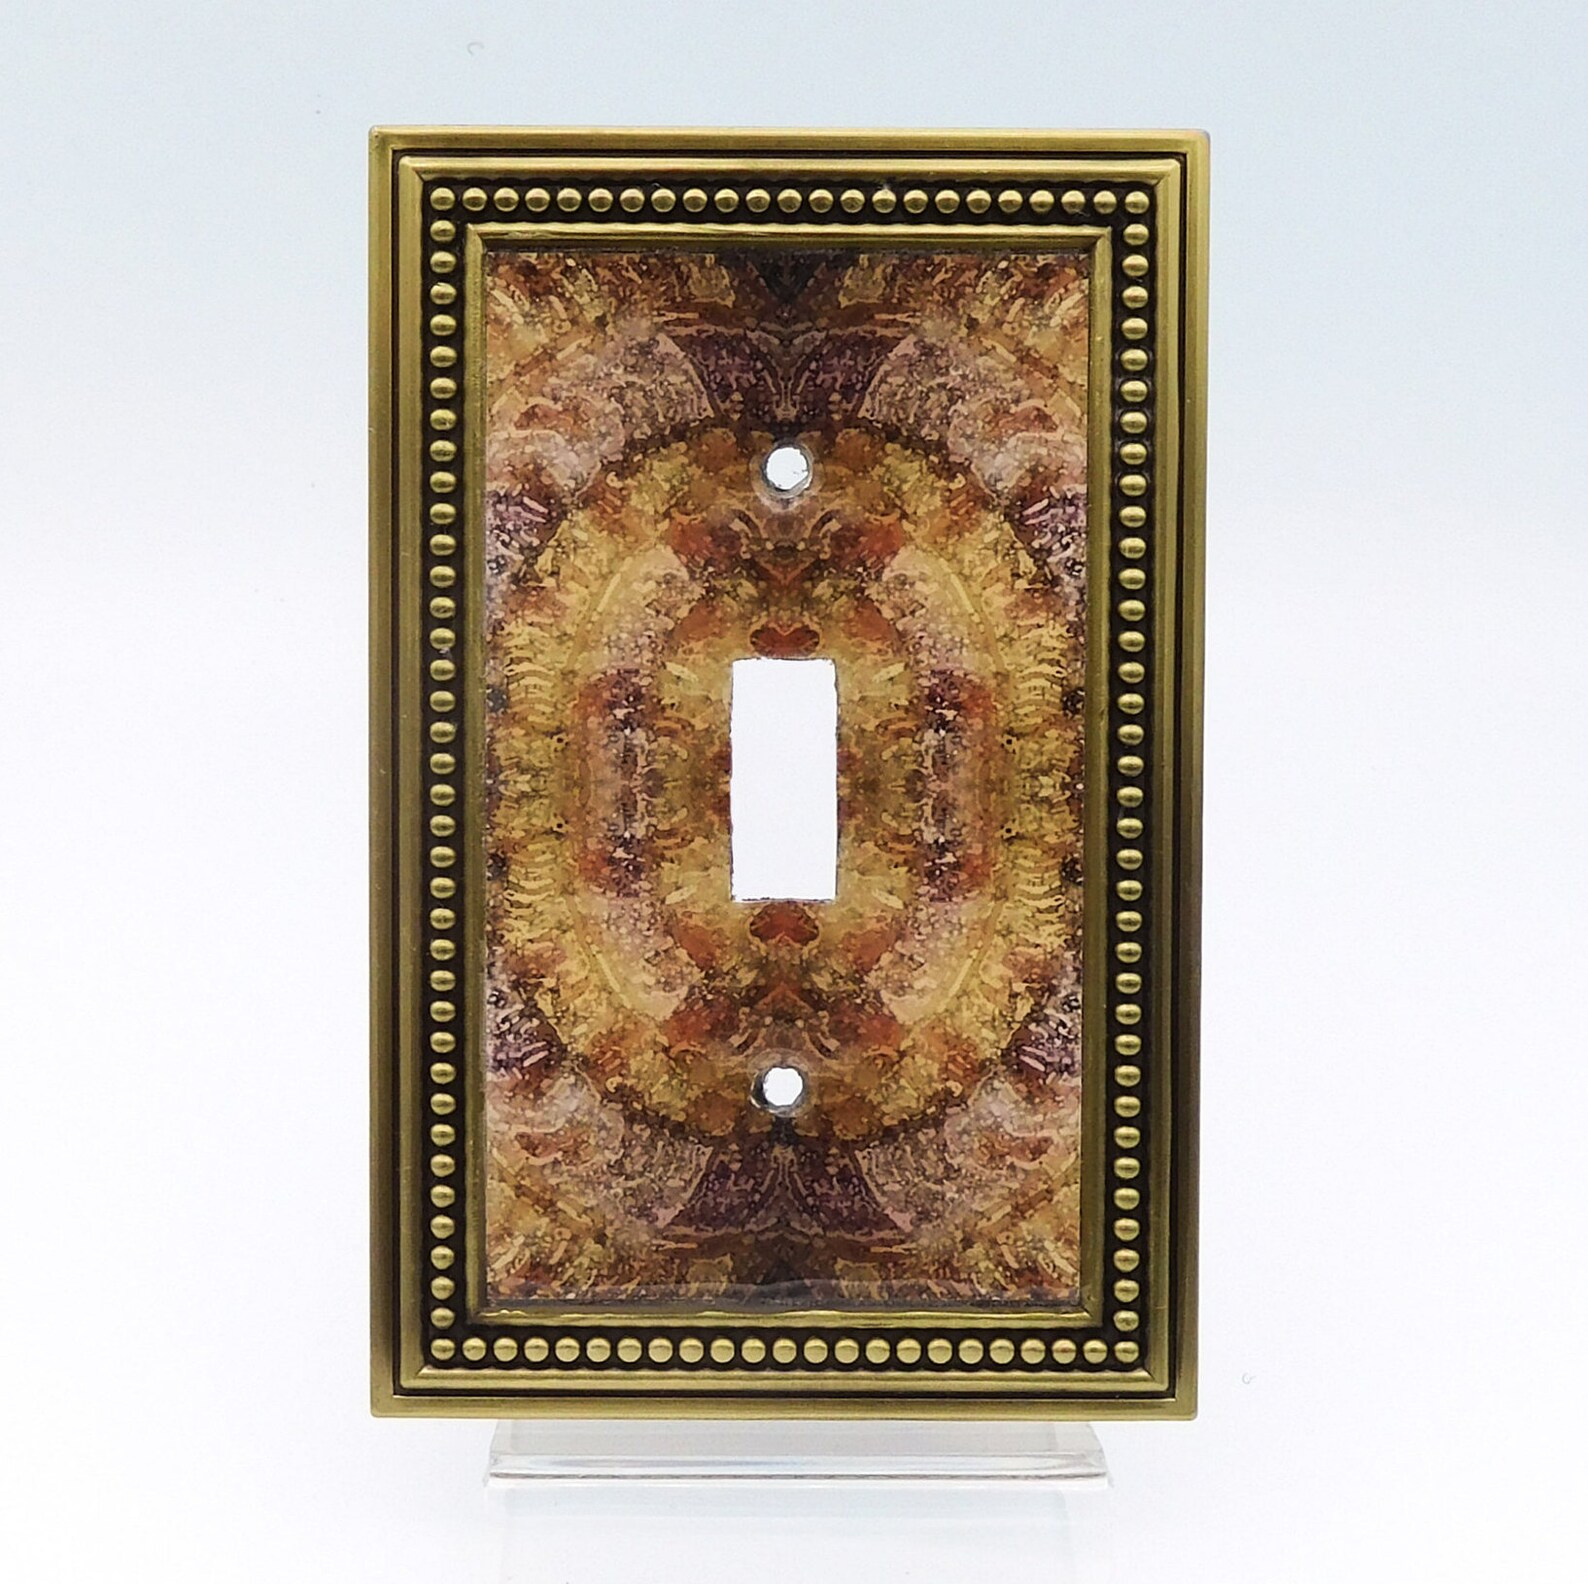 Renaissance Faire Light Switch Cover in Copper or Gold Finish - Etsy